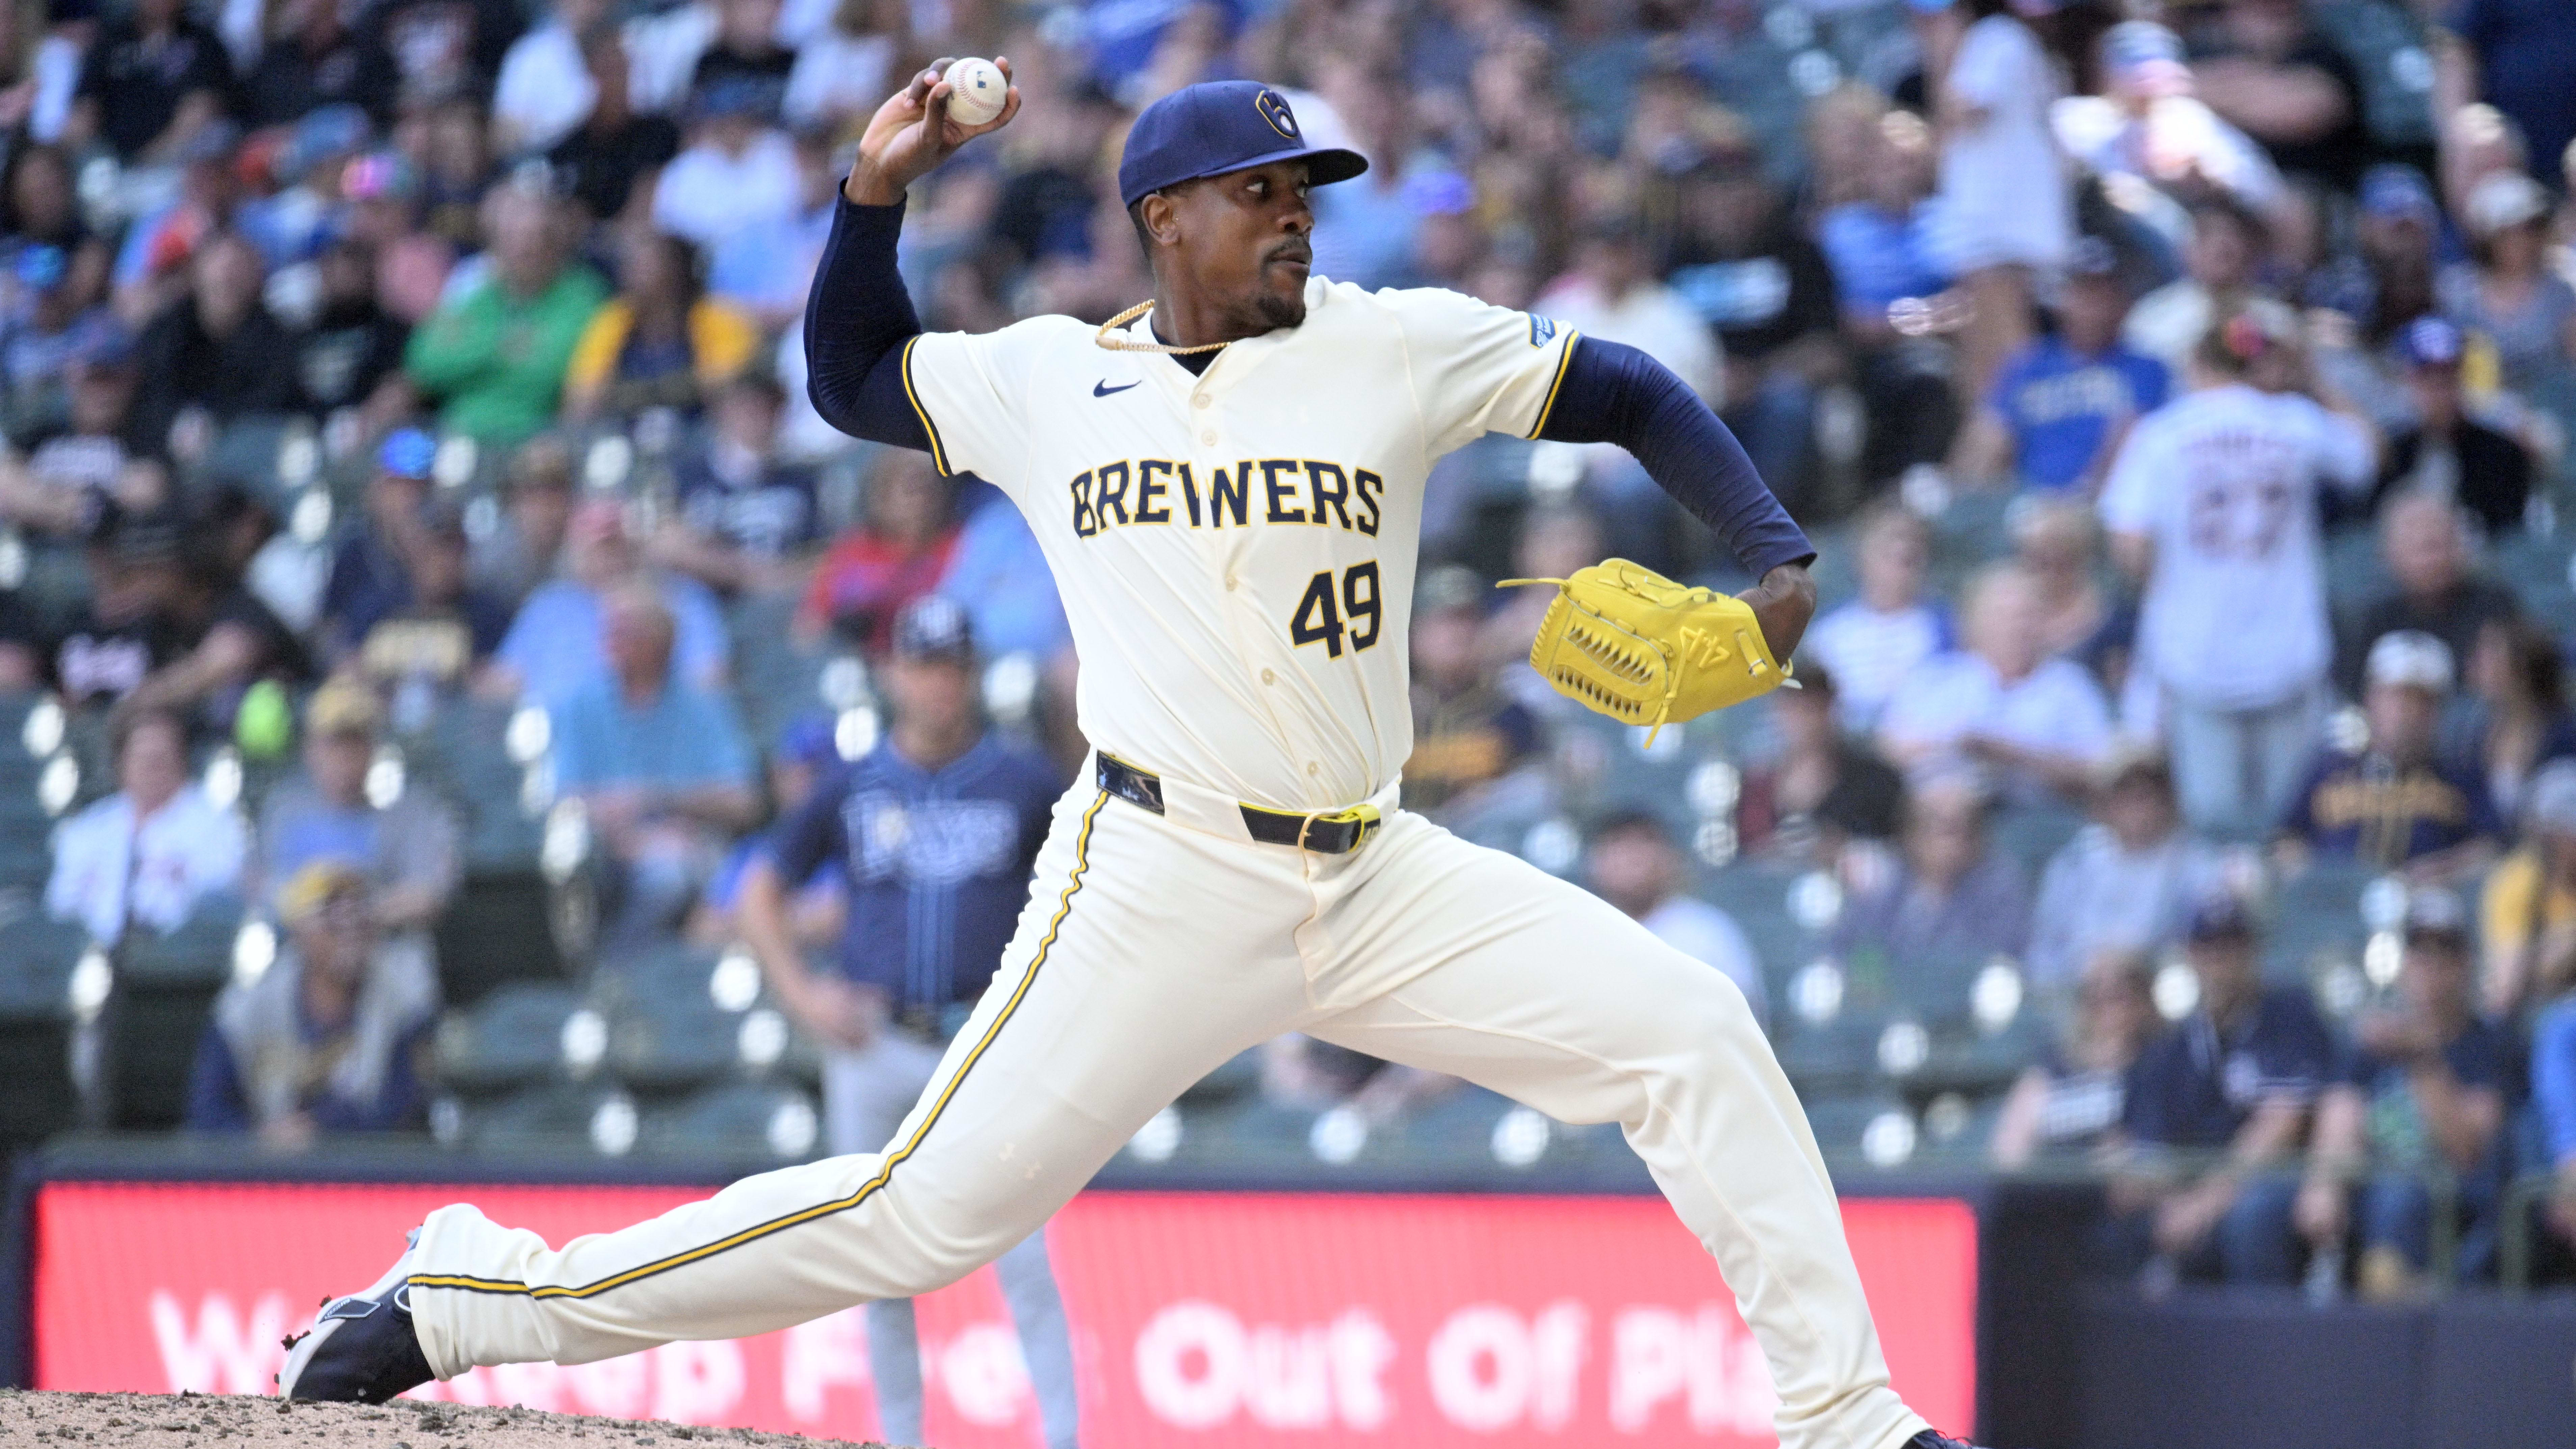 Umpires Demand Brewers Pitcher Change Glove Despite Fact He Used It Previous Night